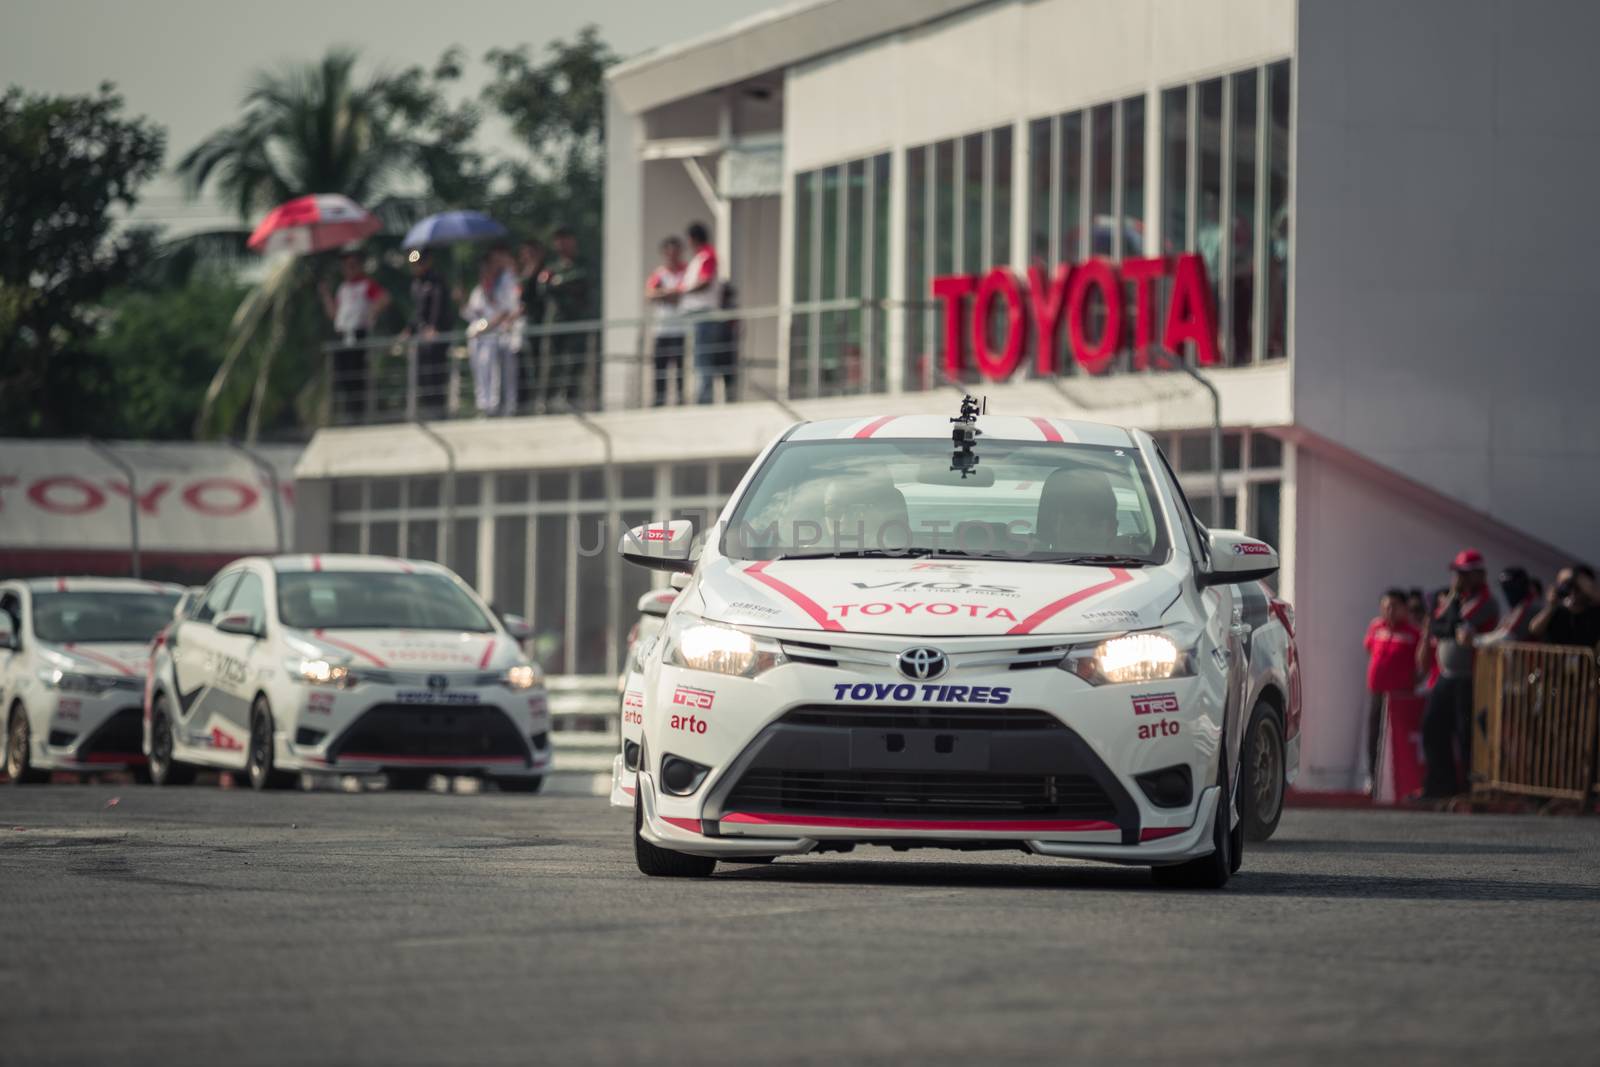 Udon Thani, Thailand - October 18, 2015: Toyota Colora Altis perform drifting on the track at the event Toyota Motor Sport show at Udon Thani, Thailand with people looking in the background